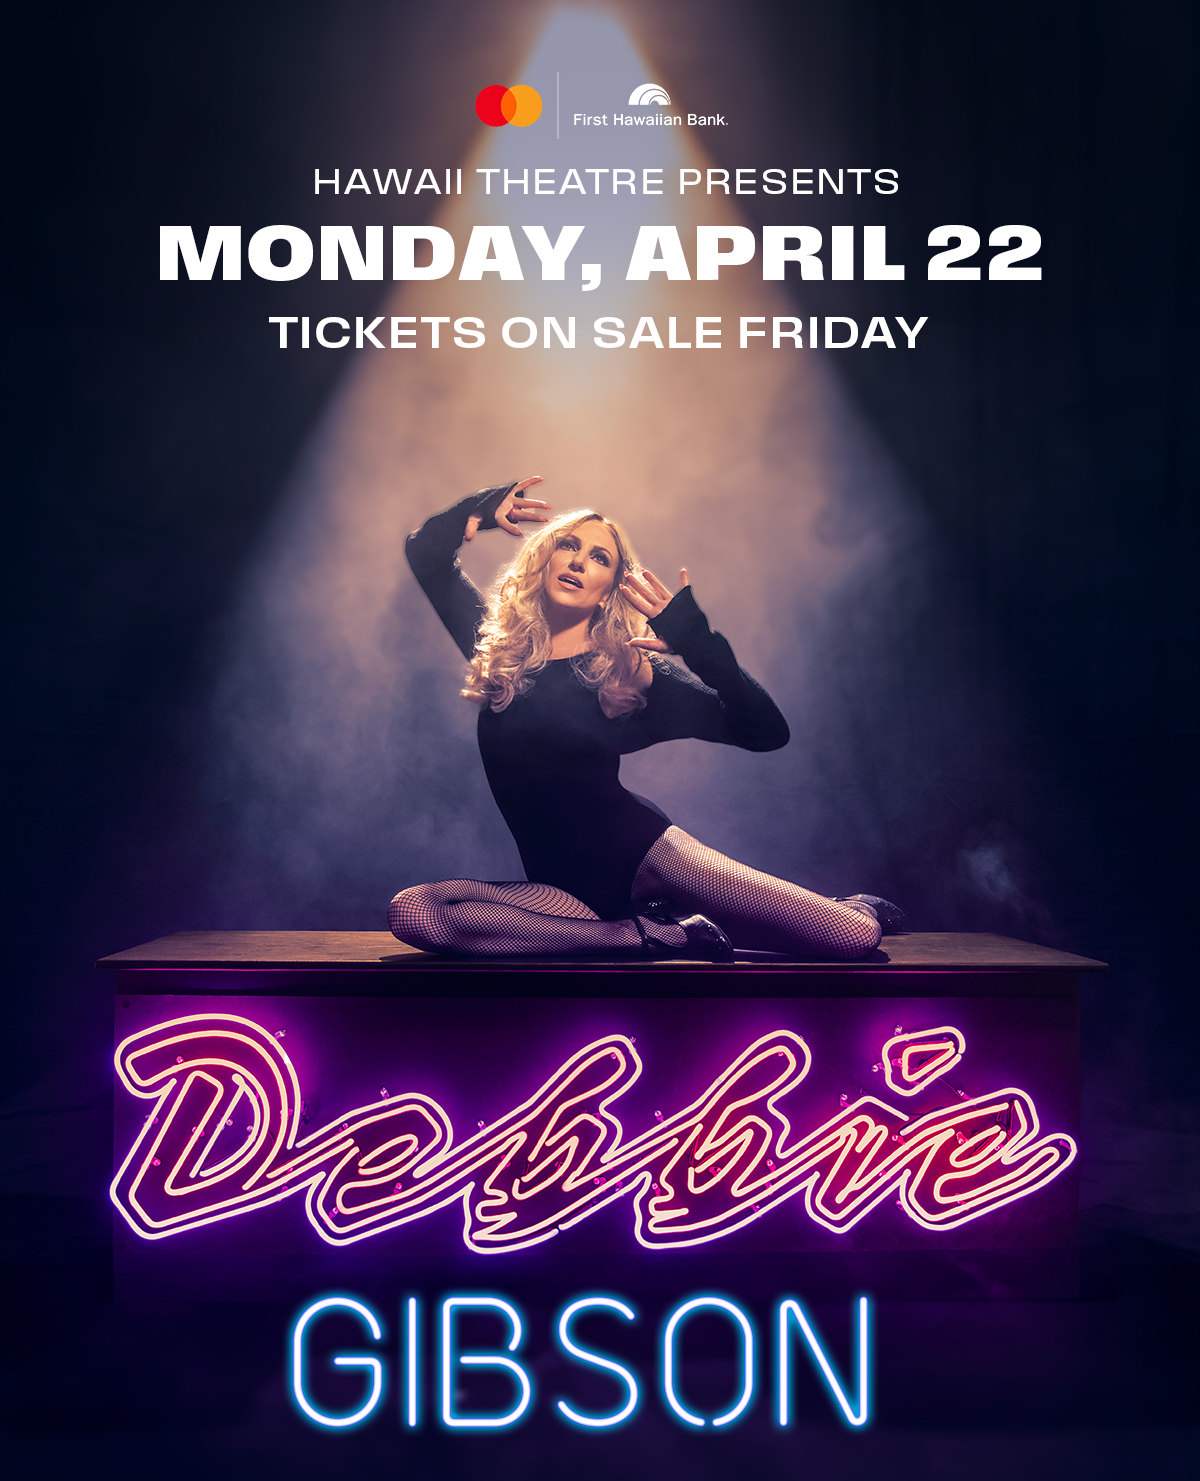 DEBBIE GIBSON POSTER (1)